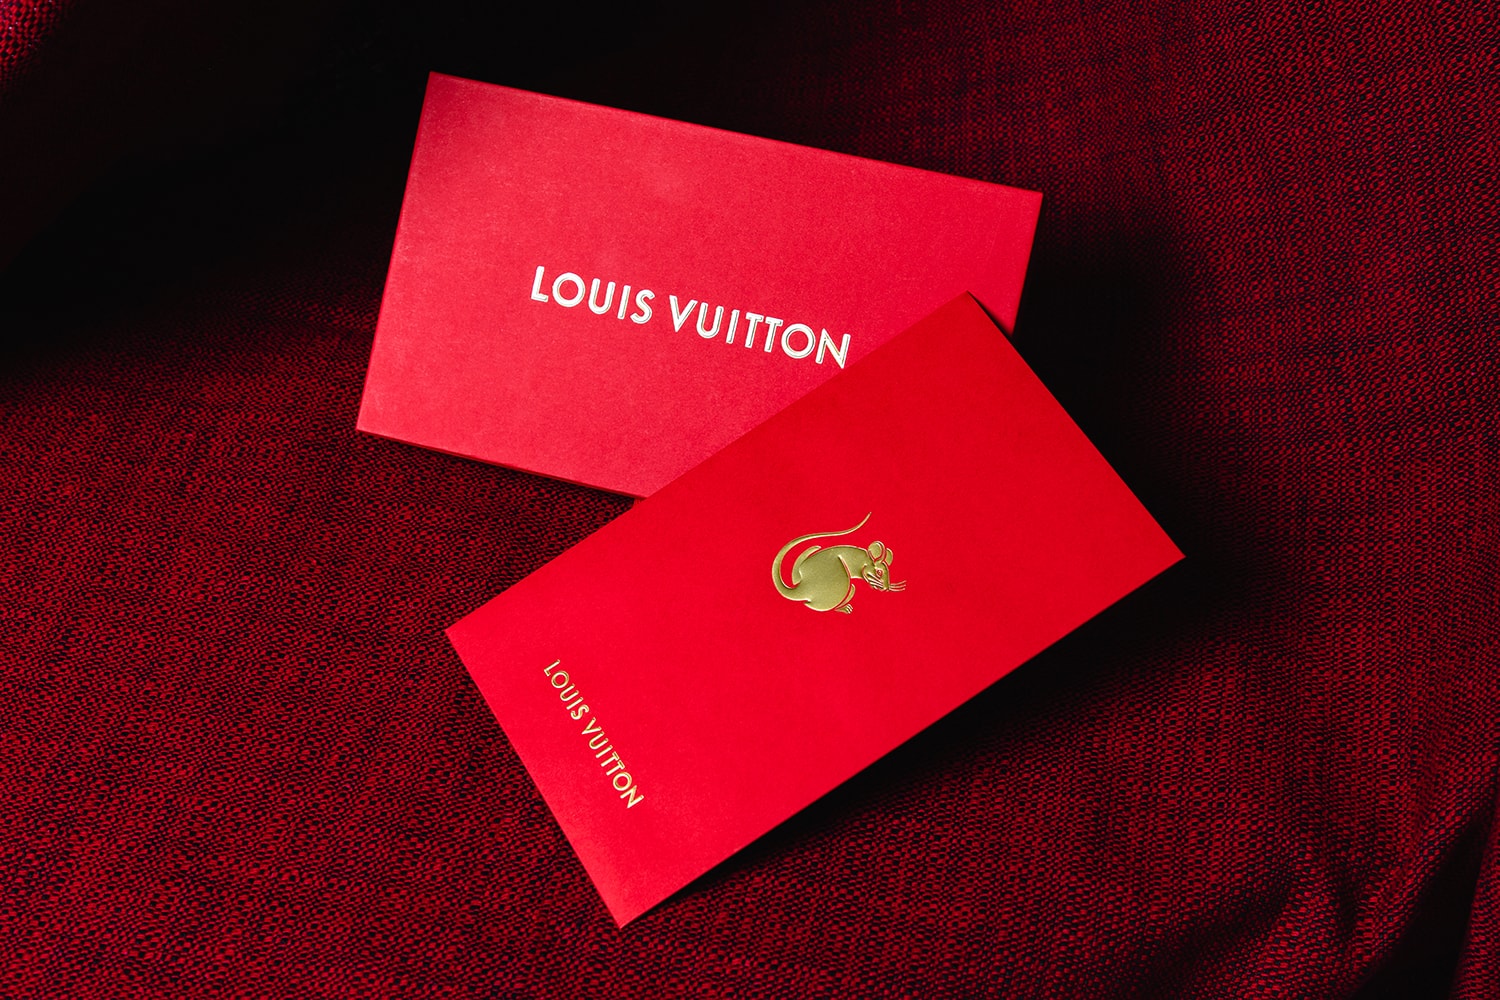 Best Branded Lunar New Year Red Pockets Round-Up year of the rat Louis Vuitton Celine Paul Smith bape Adidas hbx baby milo Burberry clot Chinese new year fendi Gucci nike Rimowa Tiffany and co moma Jollibee Valentino Versace 